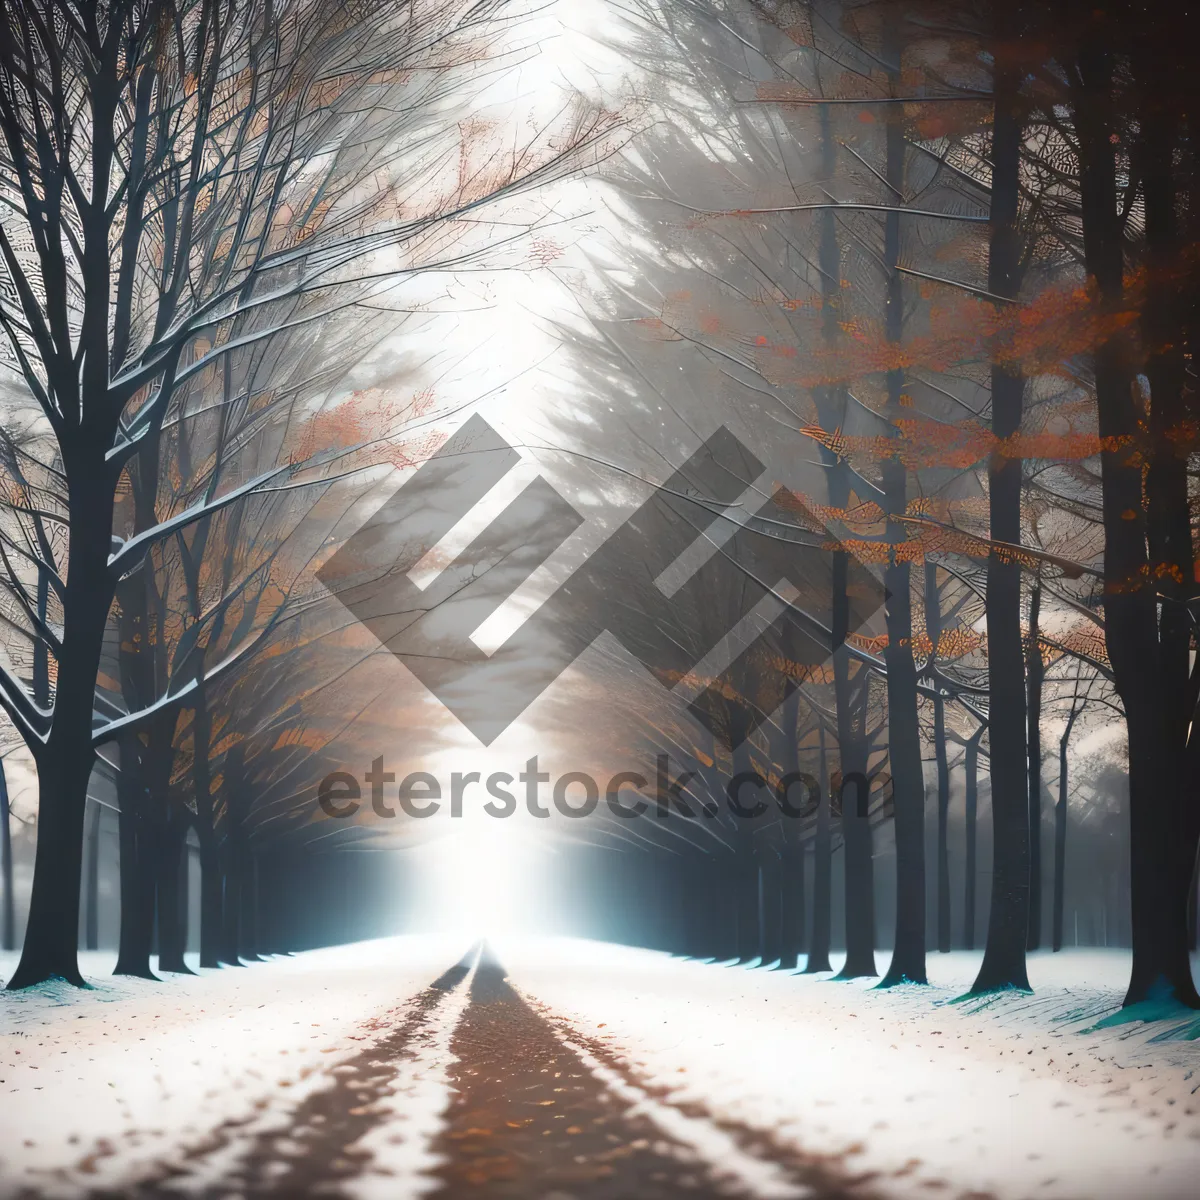 Picture of Winter Wonderland: Frosty Forest Road with Snowy Trees